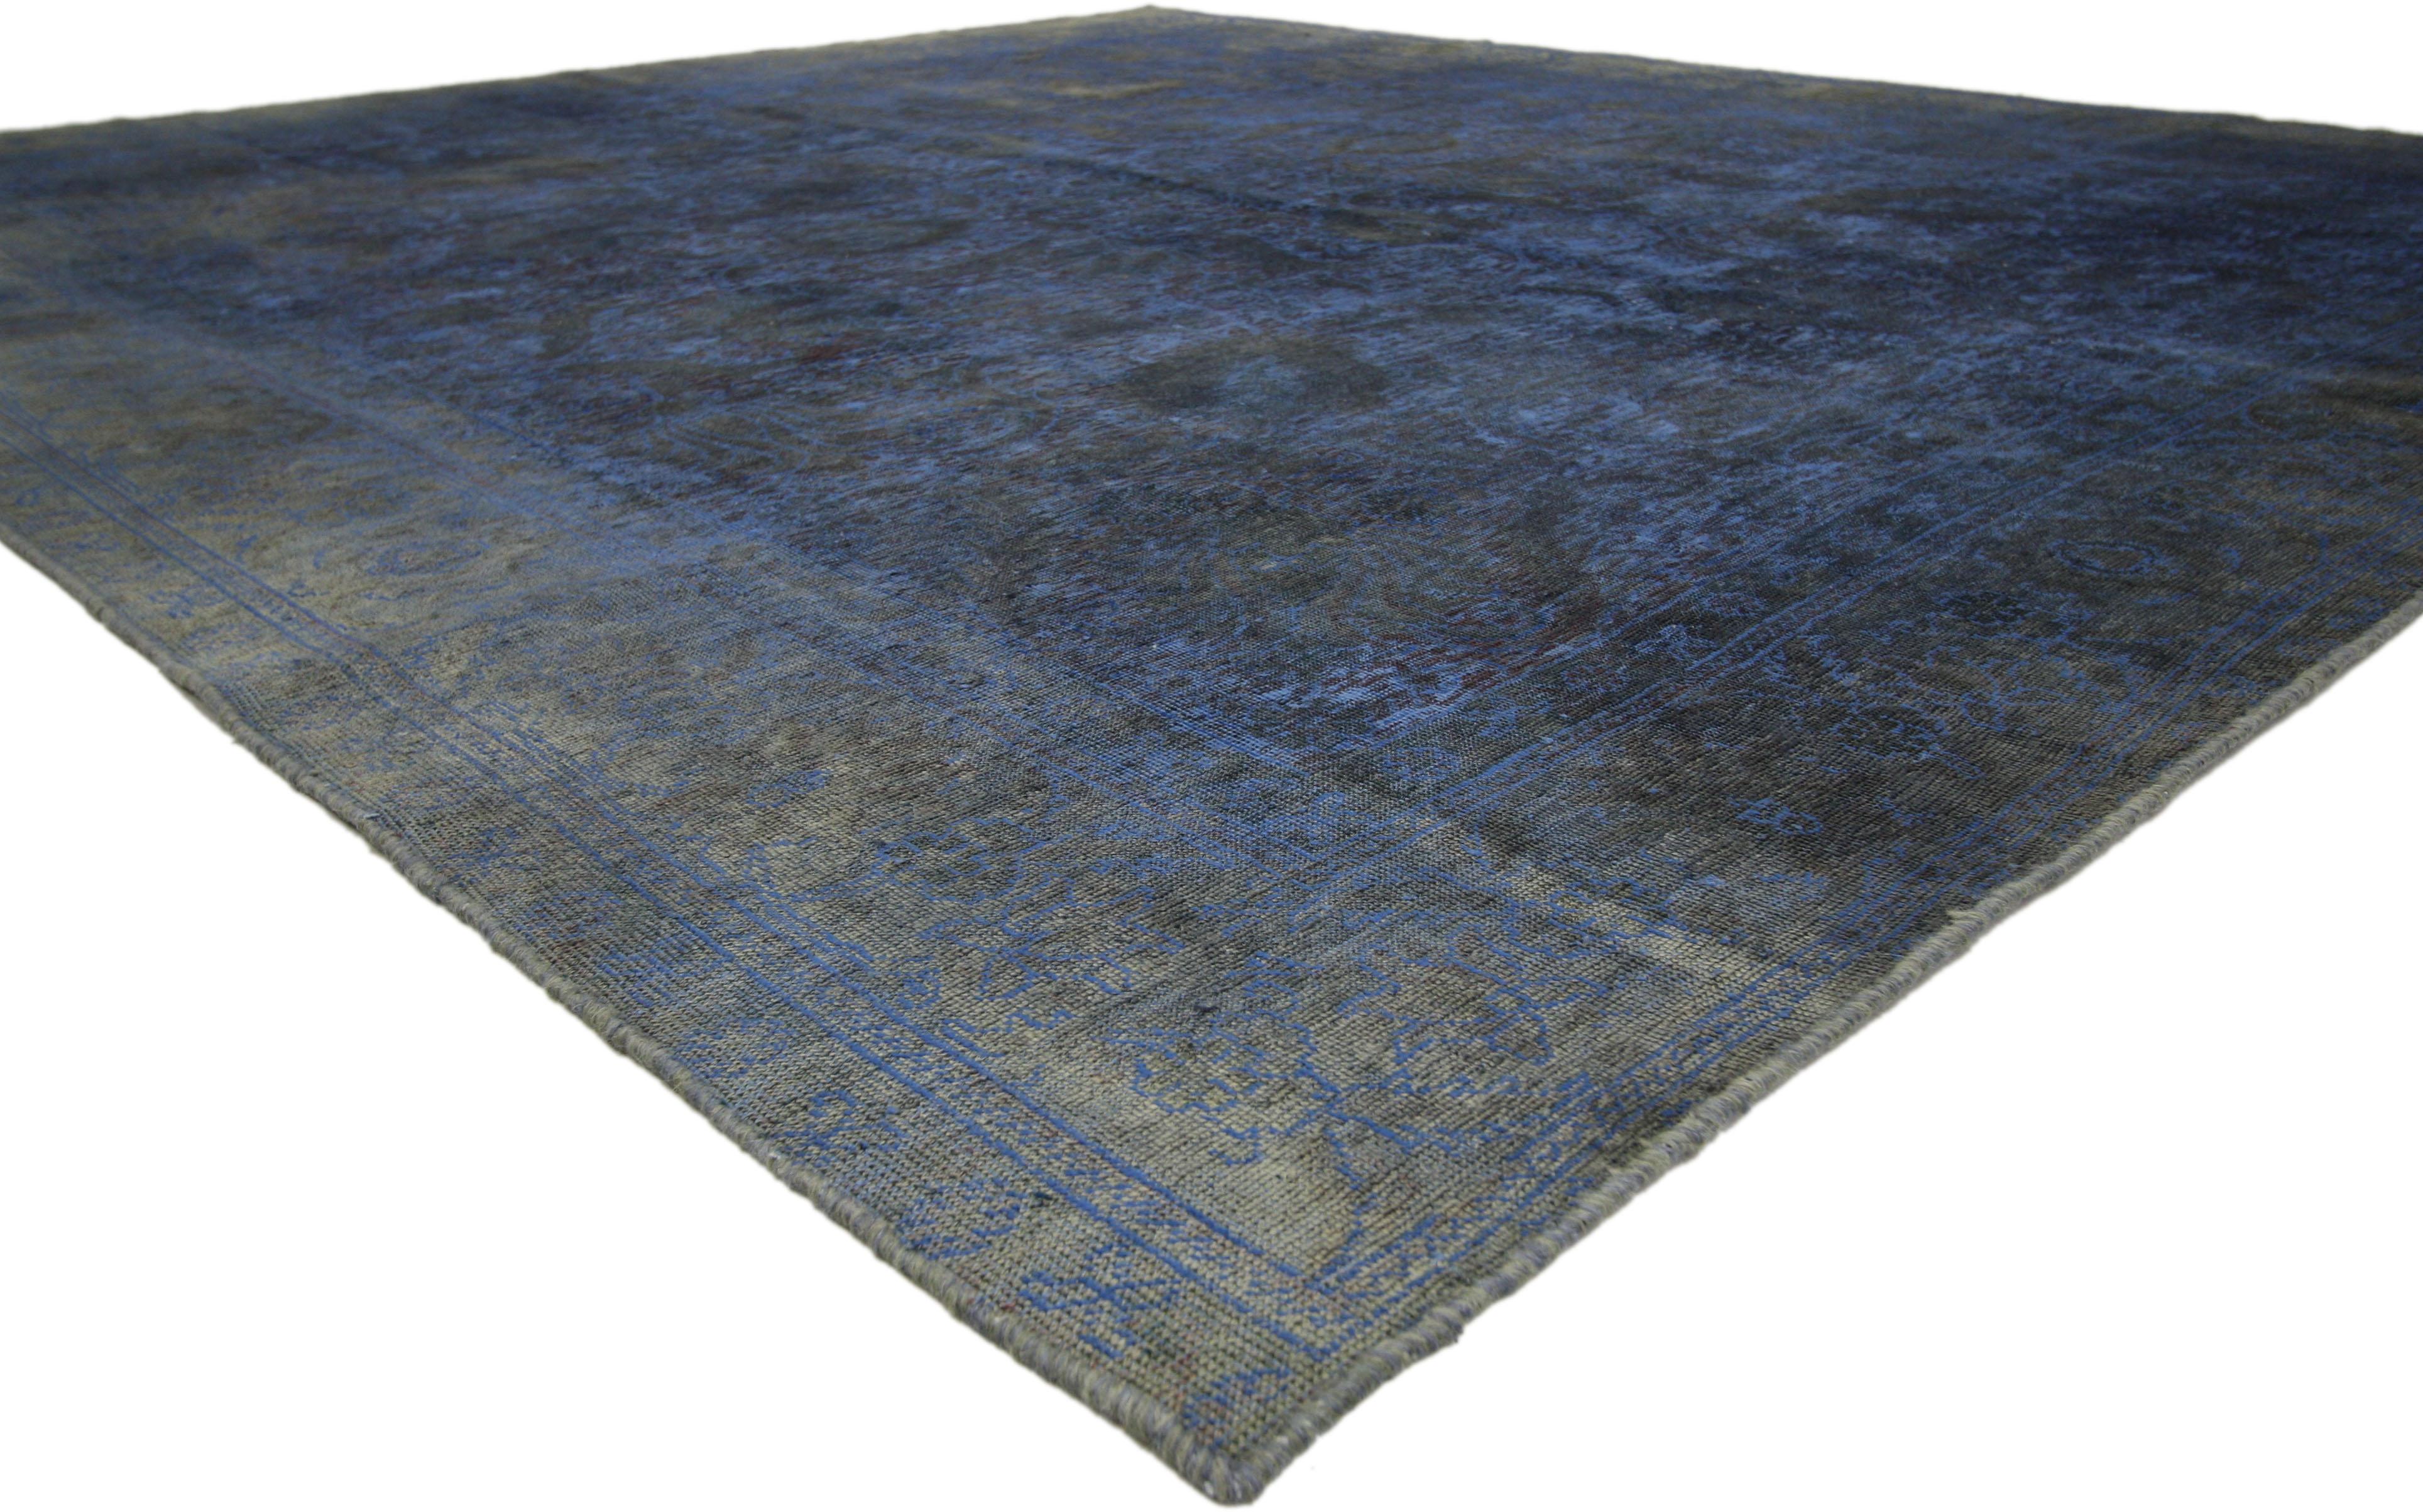 60628 Distressed Vintage Turkish Overdyed Rug with Modern Industrial Style 09'05 x 10'08. Stylish and bold combined with defined and raw, this distressed overdyed vintage Turkish rug goes beyond the boundaries of design with historical richness and